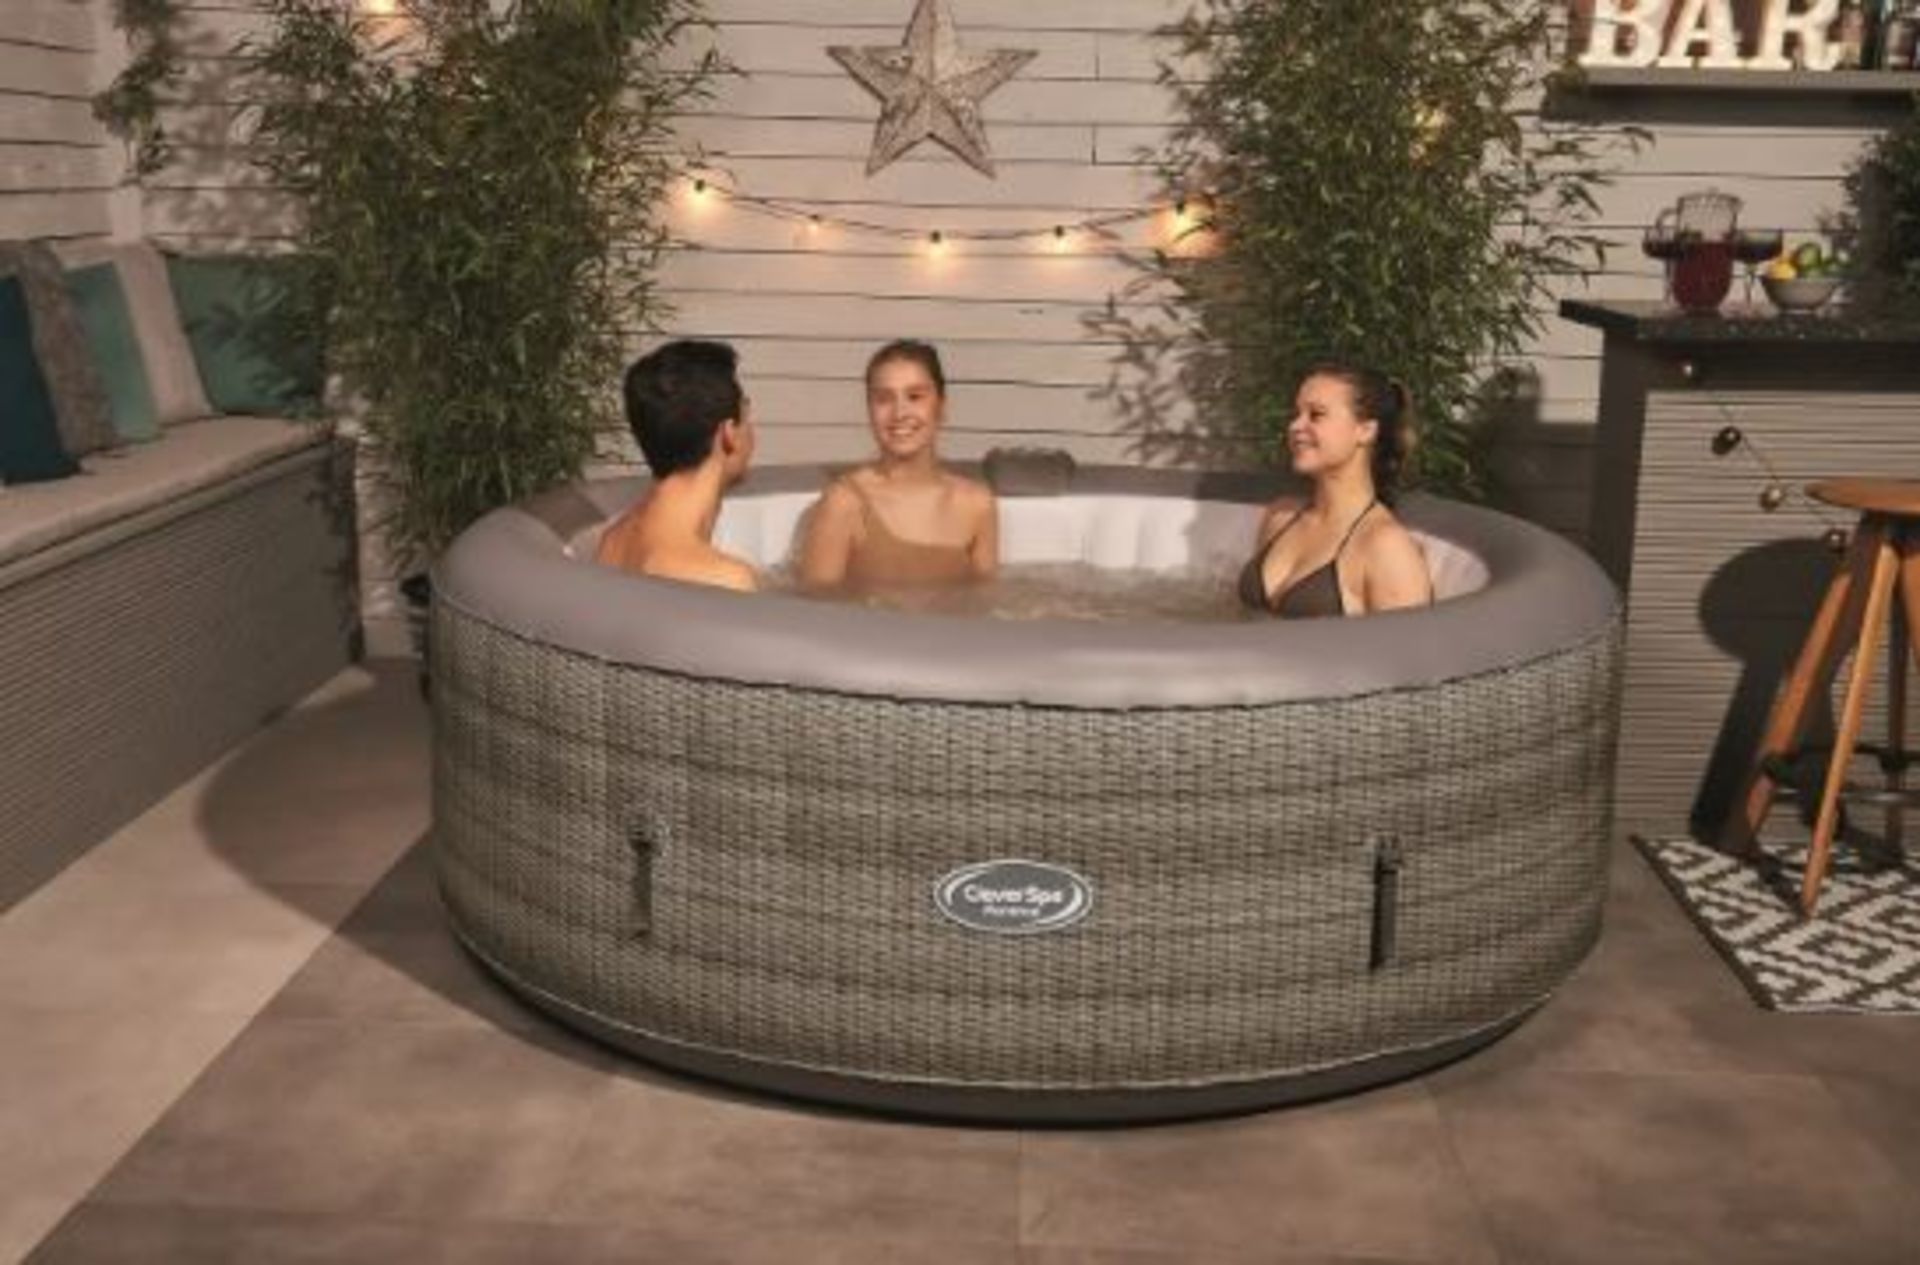 (R3B) 1x CleverSpa Florence 6 Person Hot Tub RRP £560.